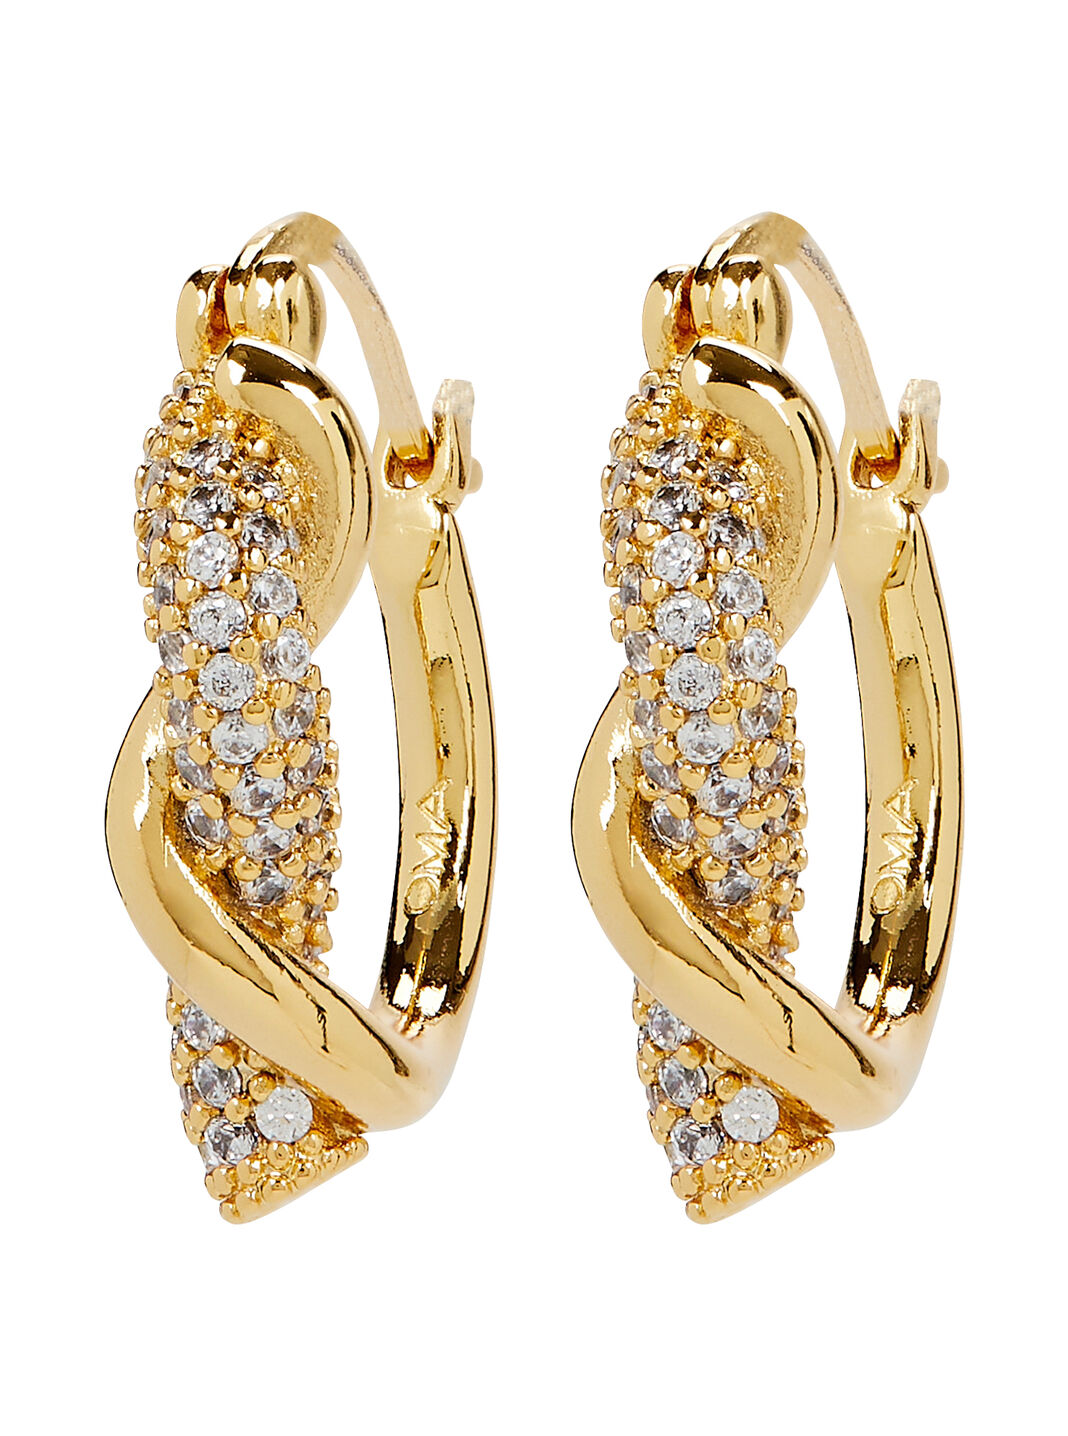 The Tider Gold-Plated Hoop Earrings